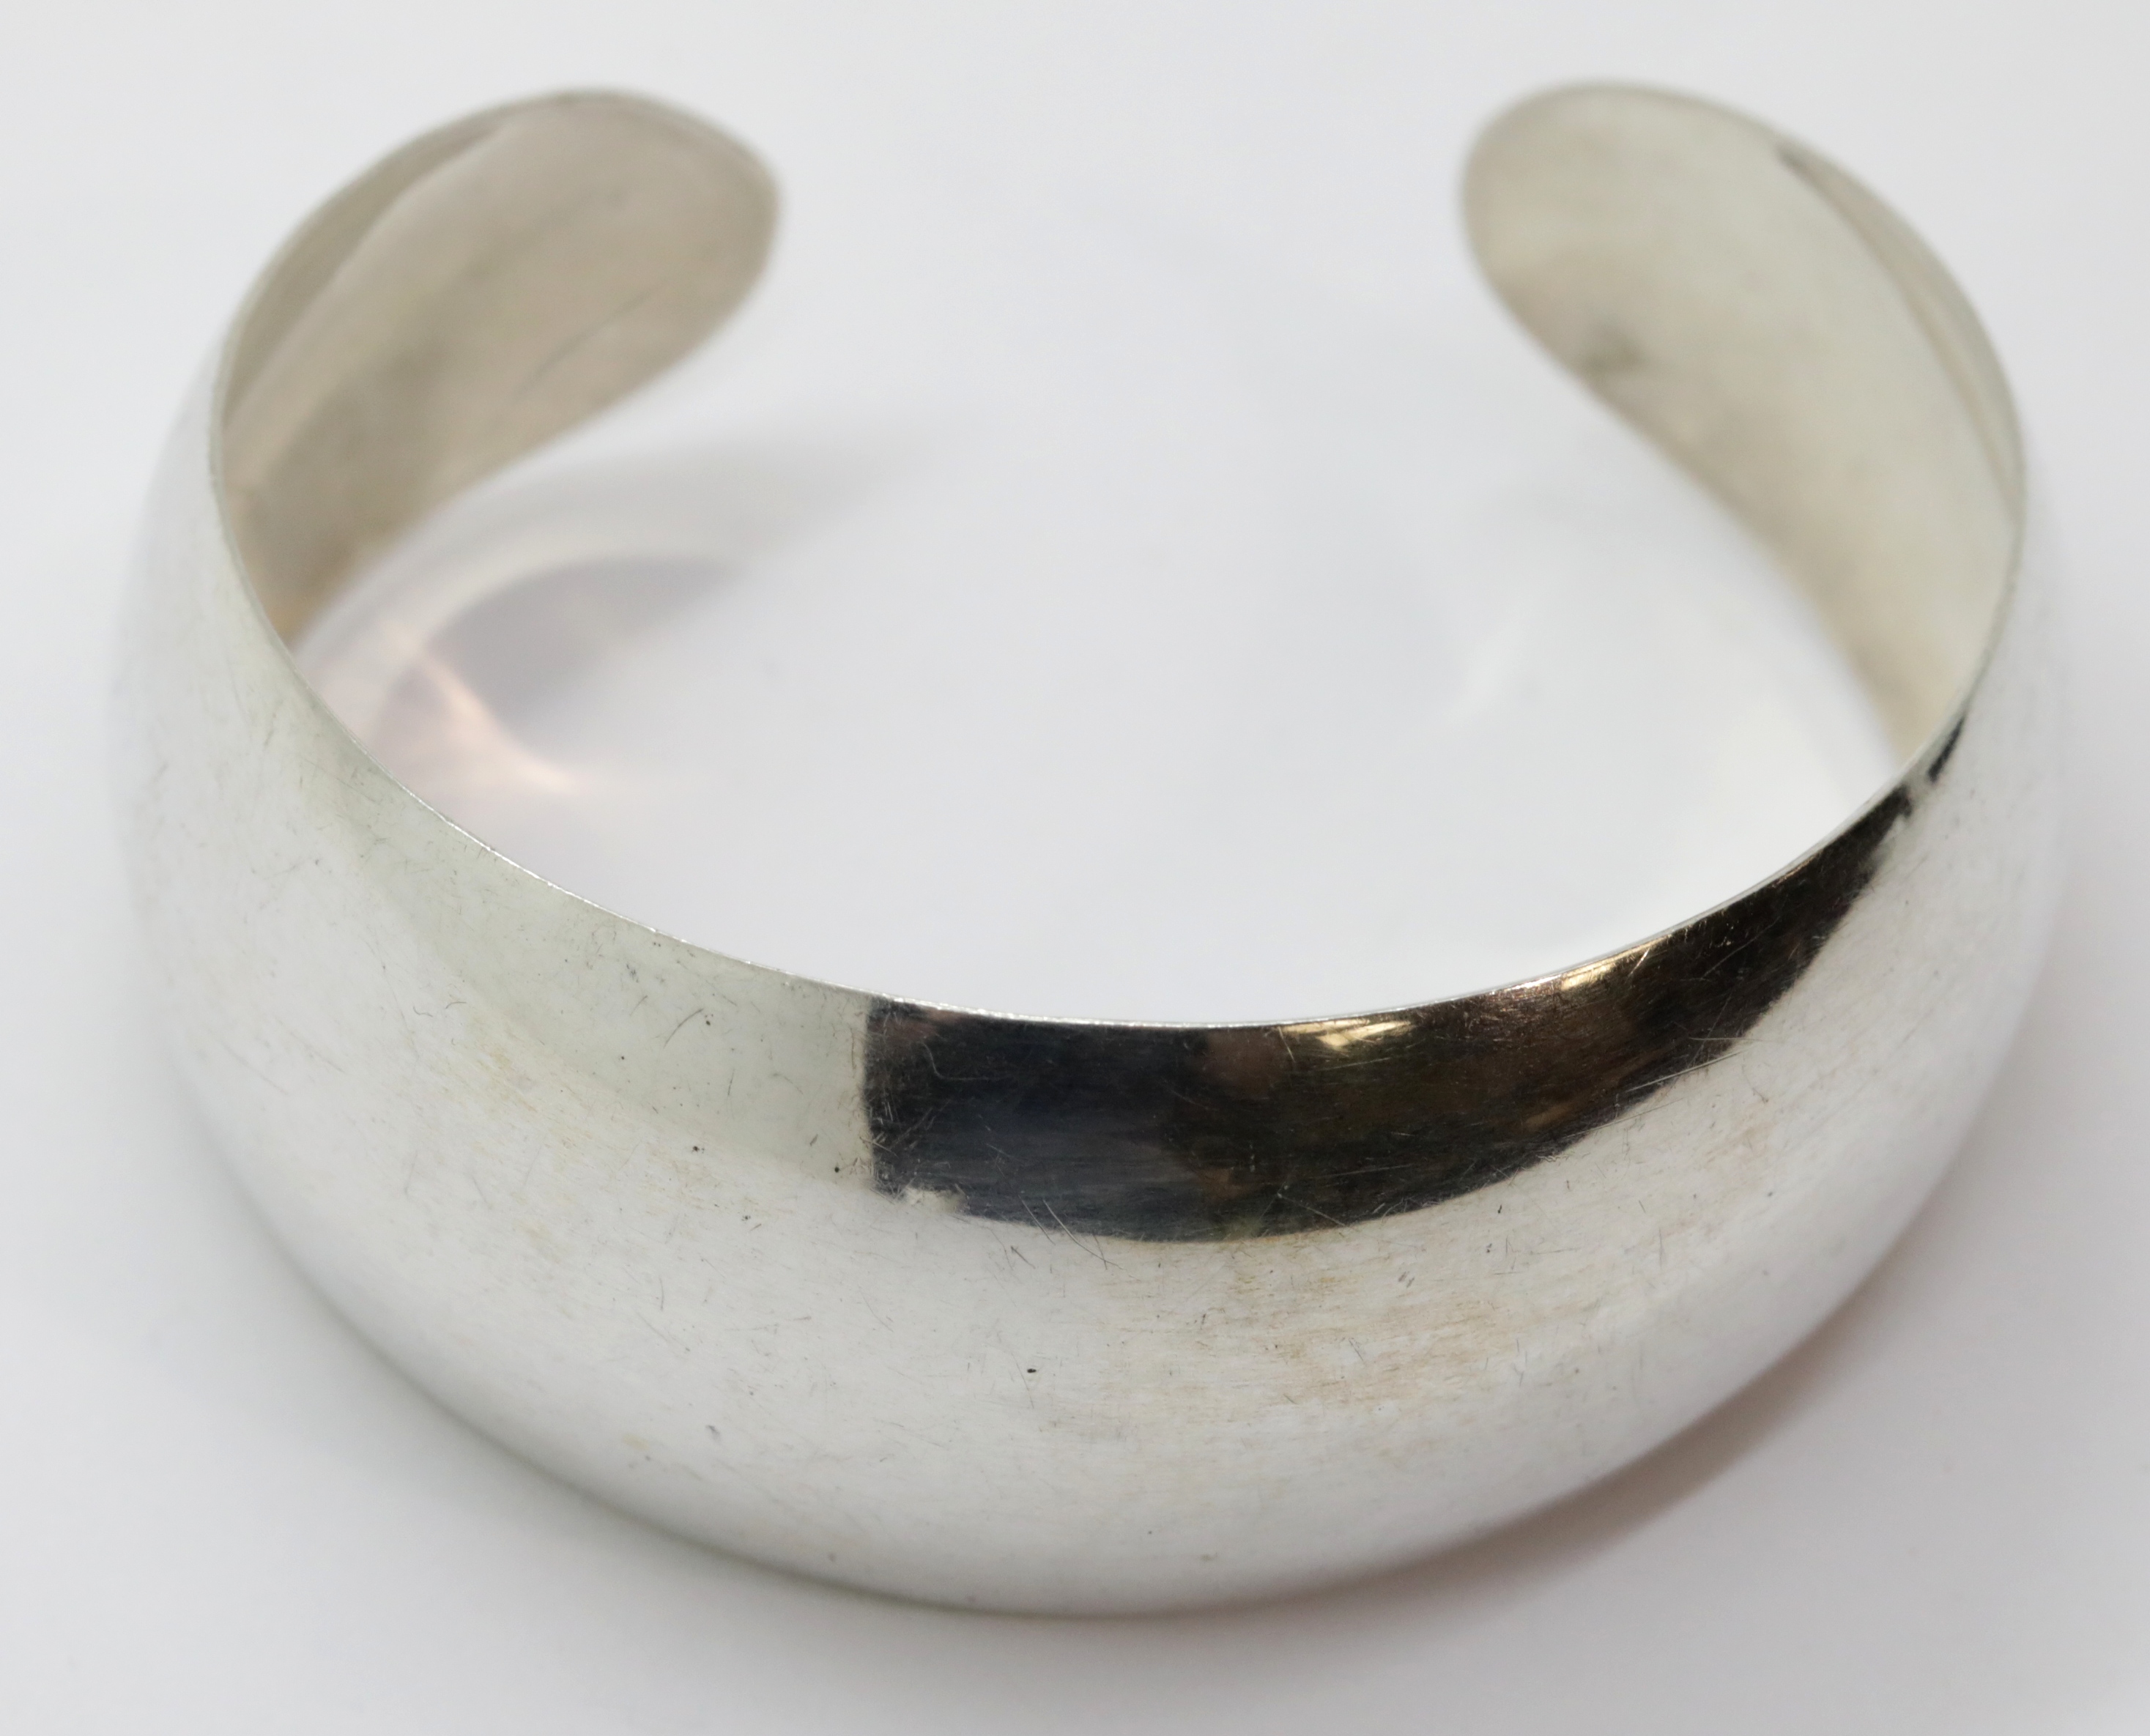 Silver 30 mm wide tapered fancy bangle. P&P Group 1 (£14+VAT for the first lot and £1+VAT for